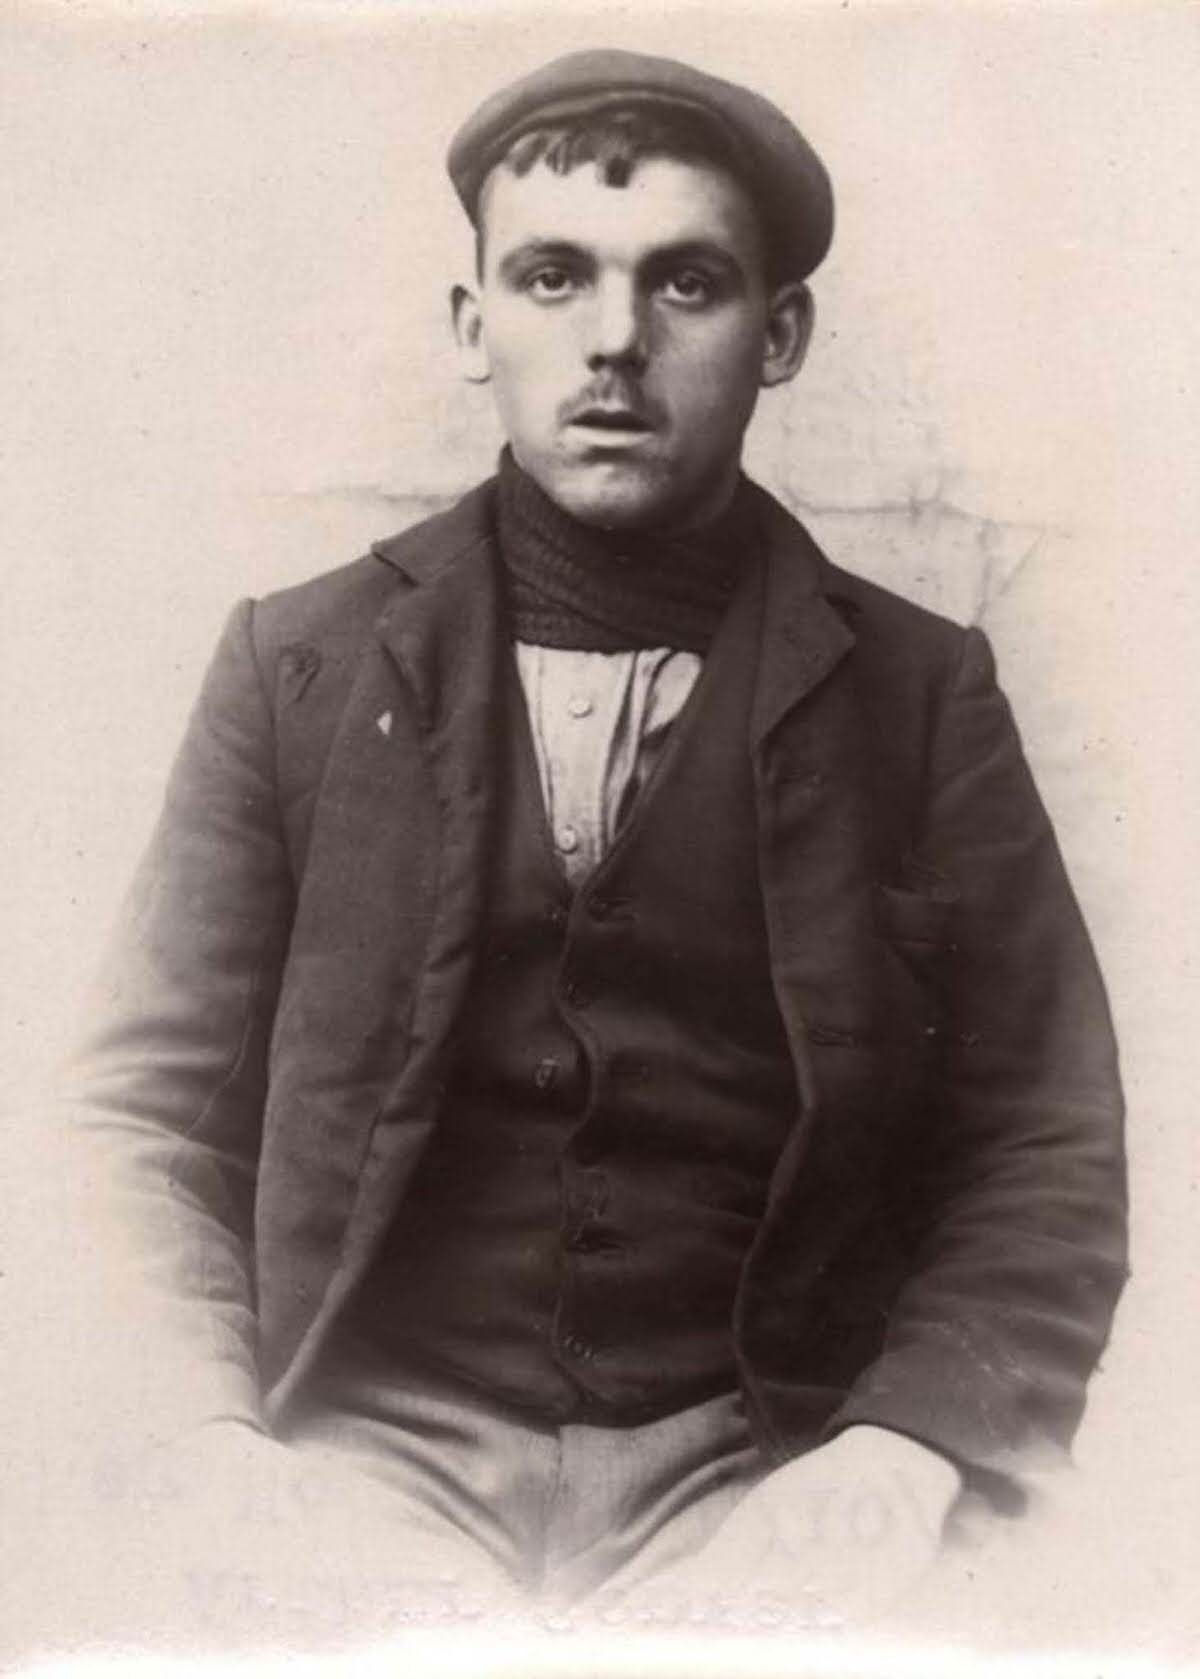 Arthur Convery, 19, arrested for stealing from a gas meter, 1905.